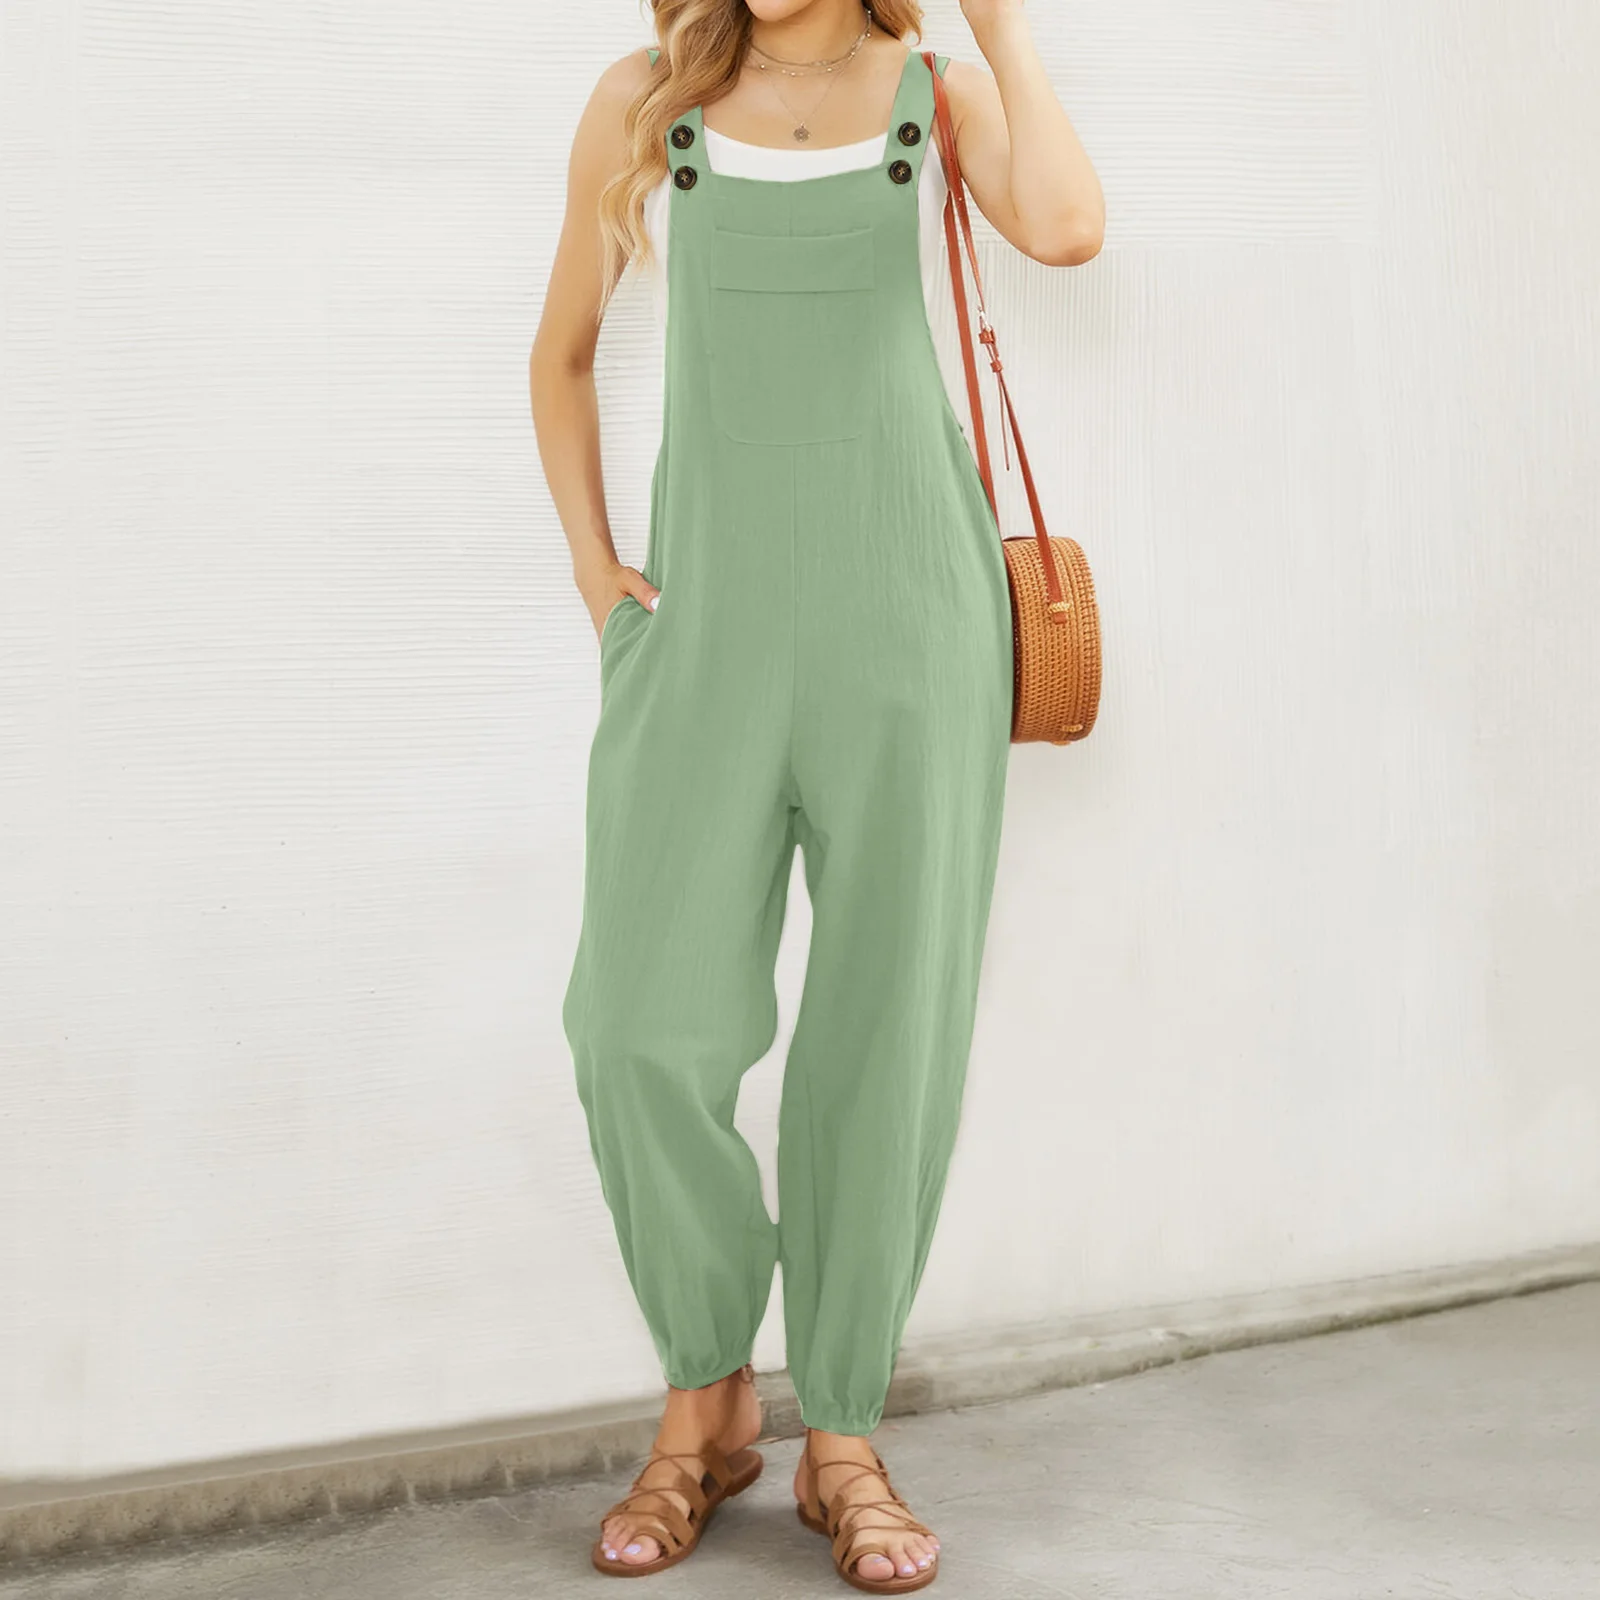 2023 Summer Cotton Linen Women Jumpsuits Solid Color Slim Waist Button Fly Strap Casual Female Rompers with Pockets Lady Overall